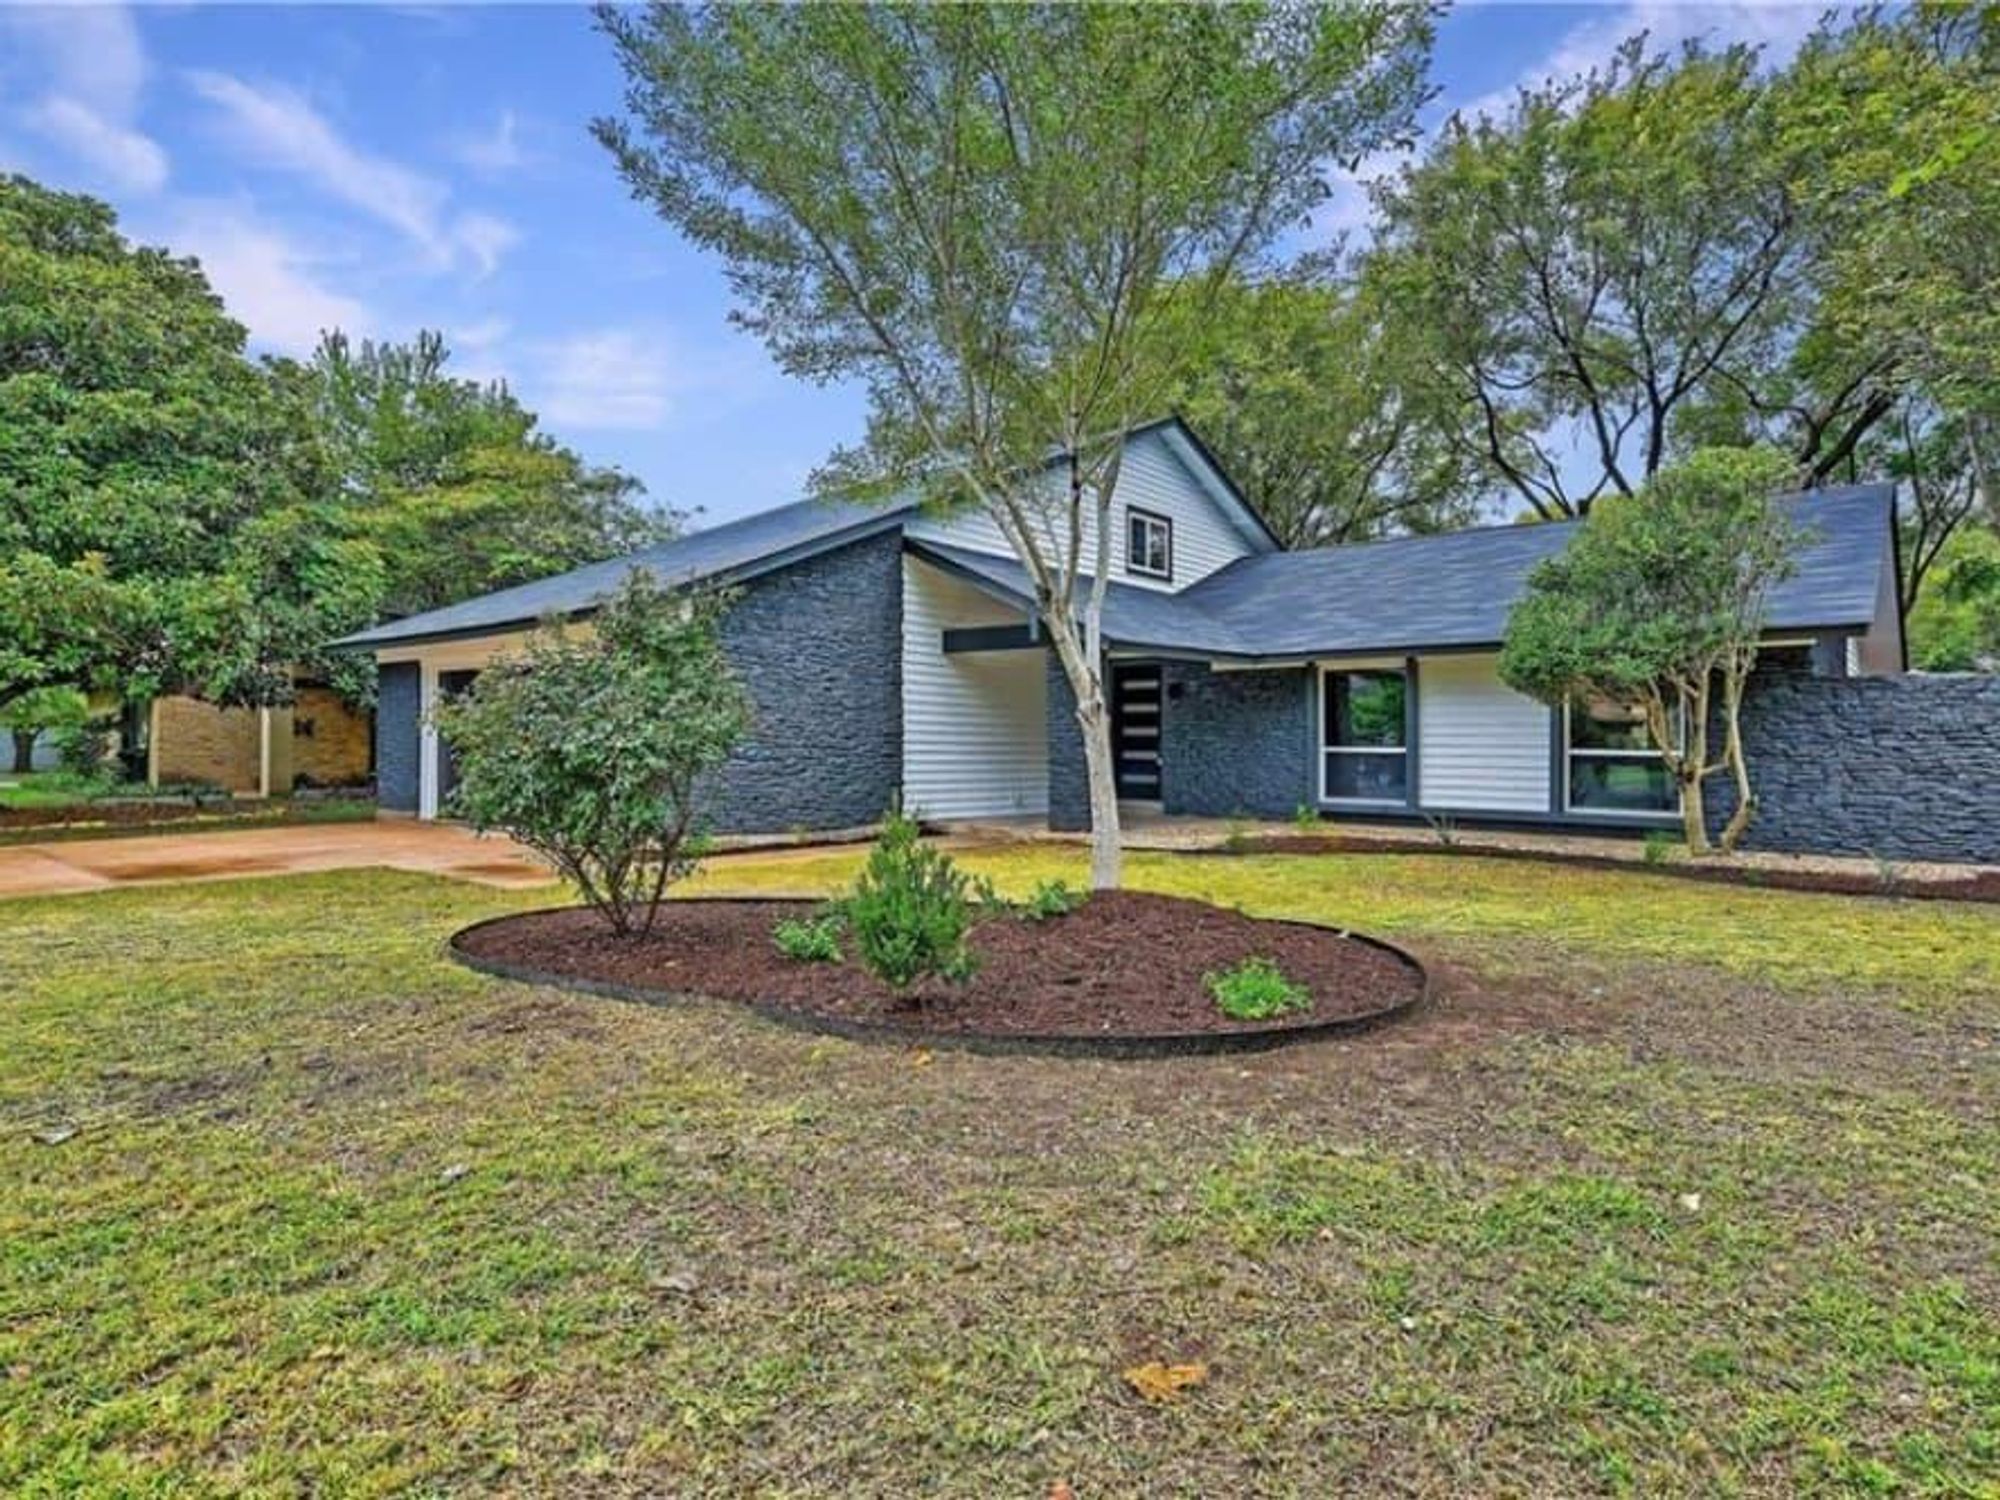 Austin home for sale